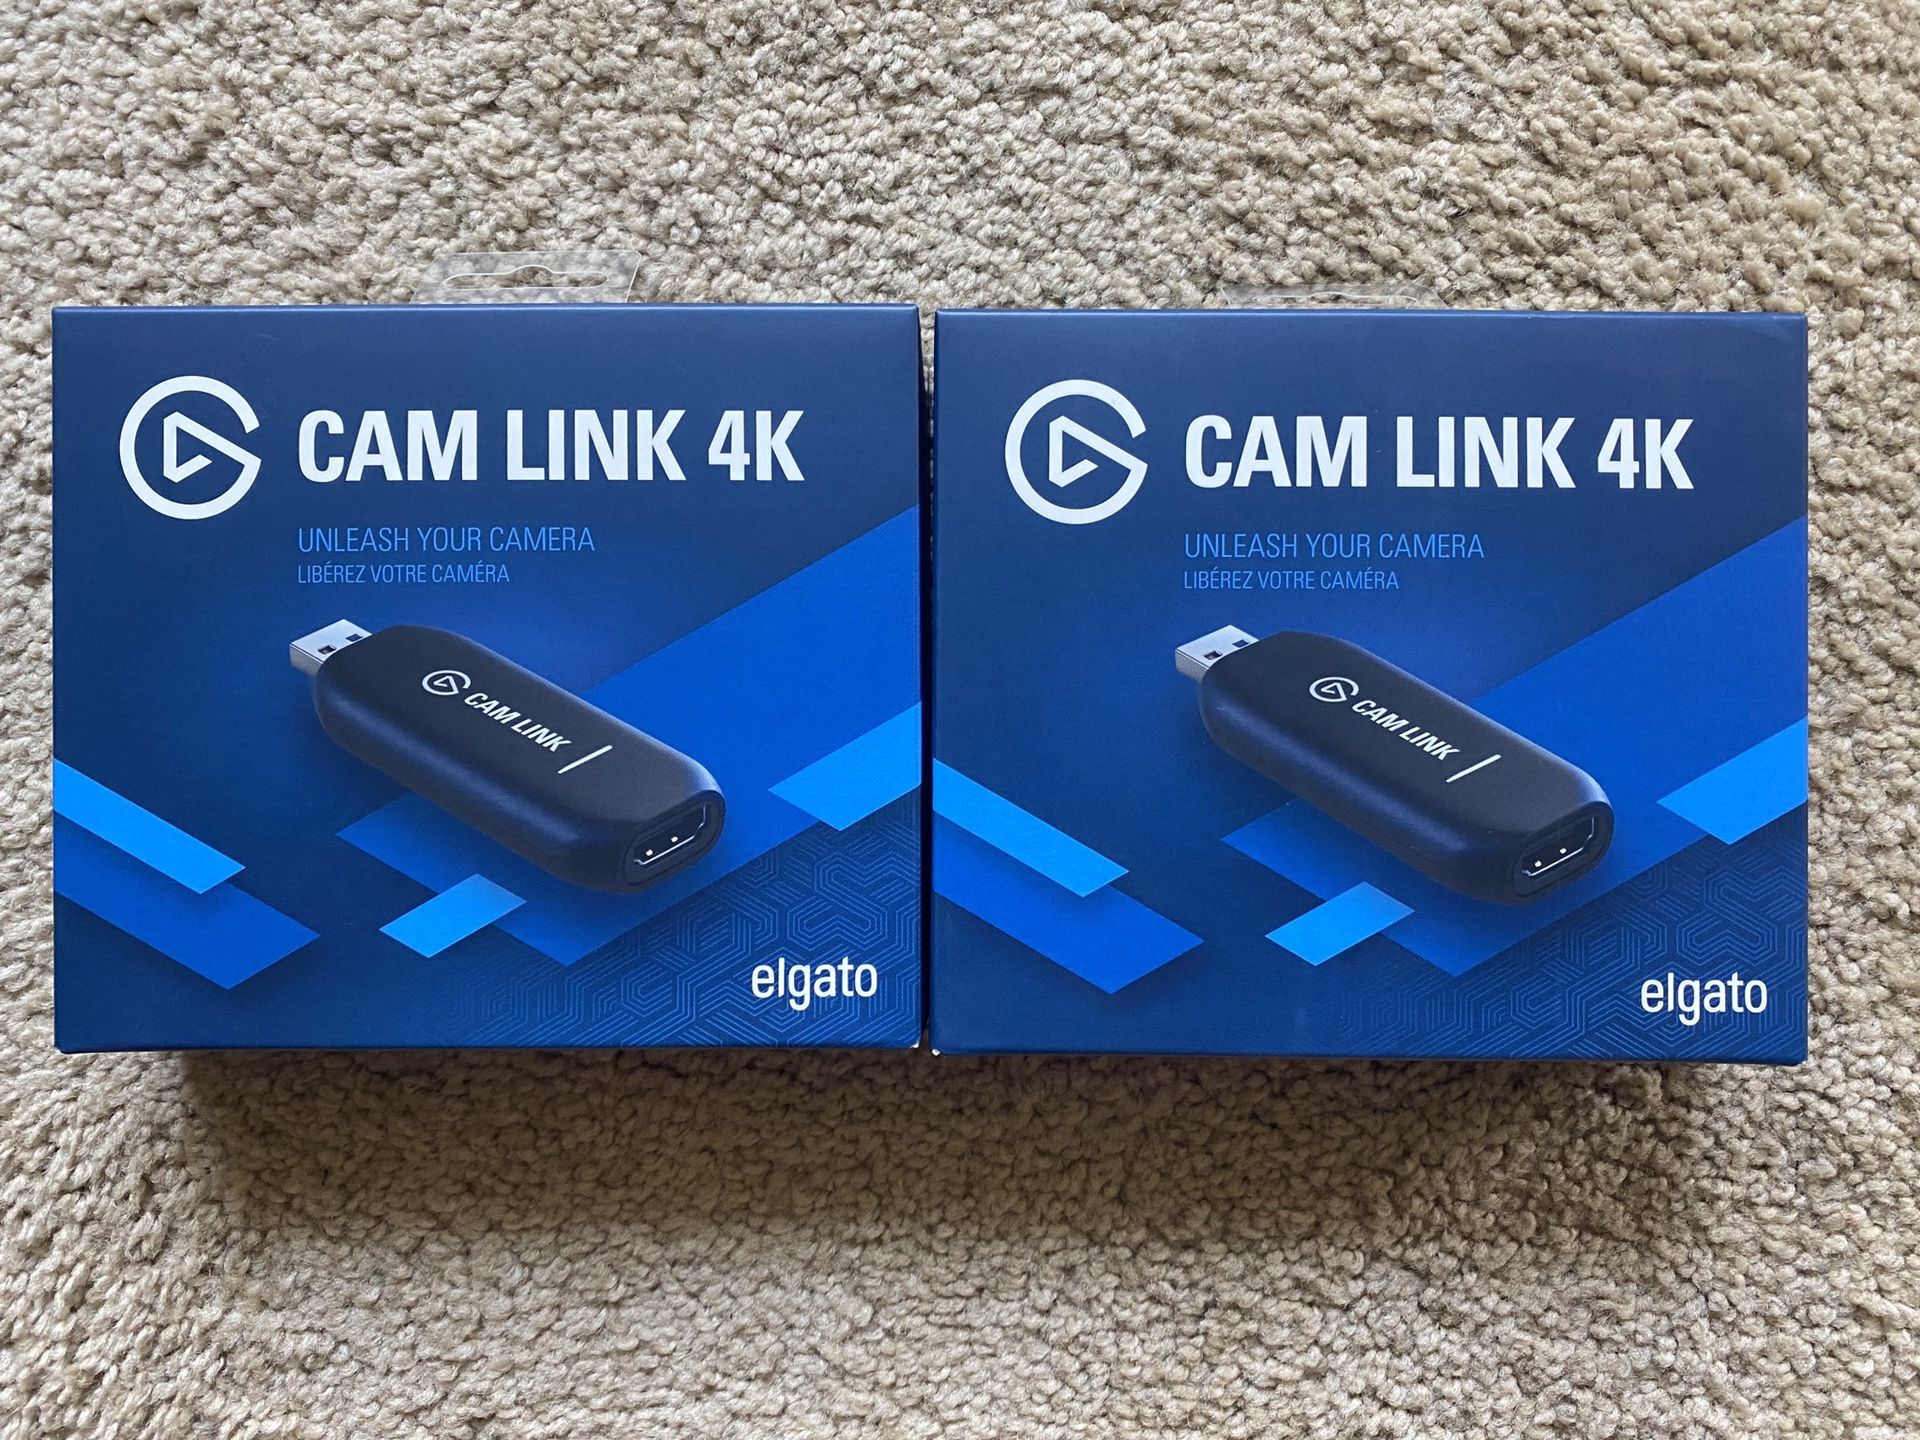 2 Brand new Elgato Cam Link 4K, will sell fast